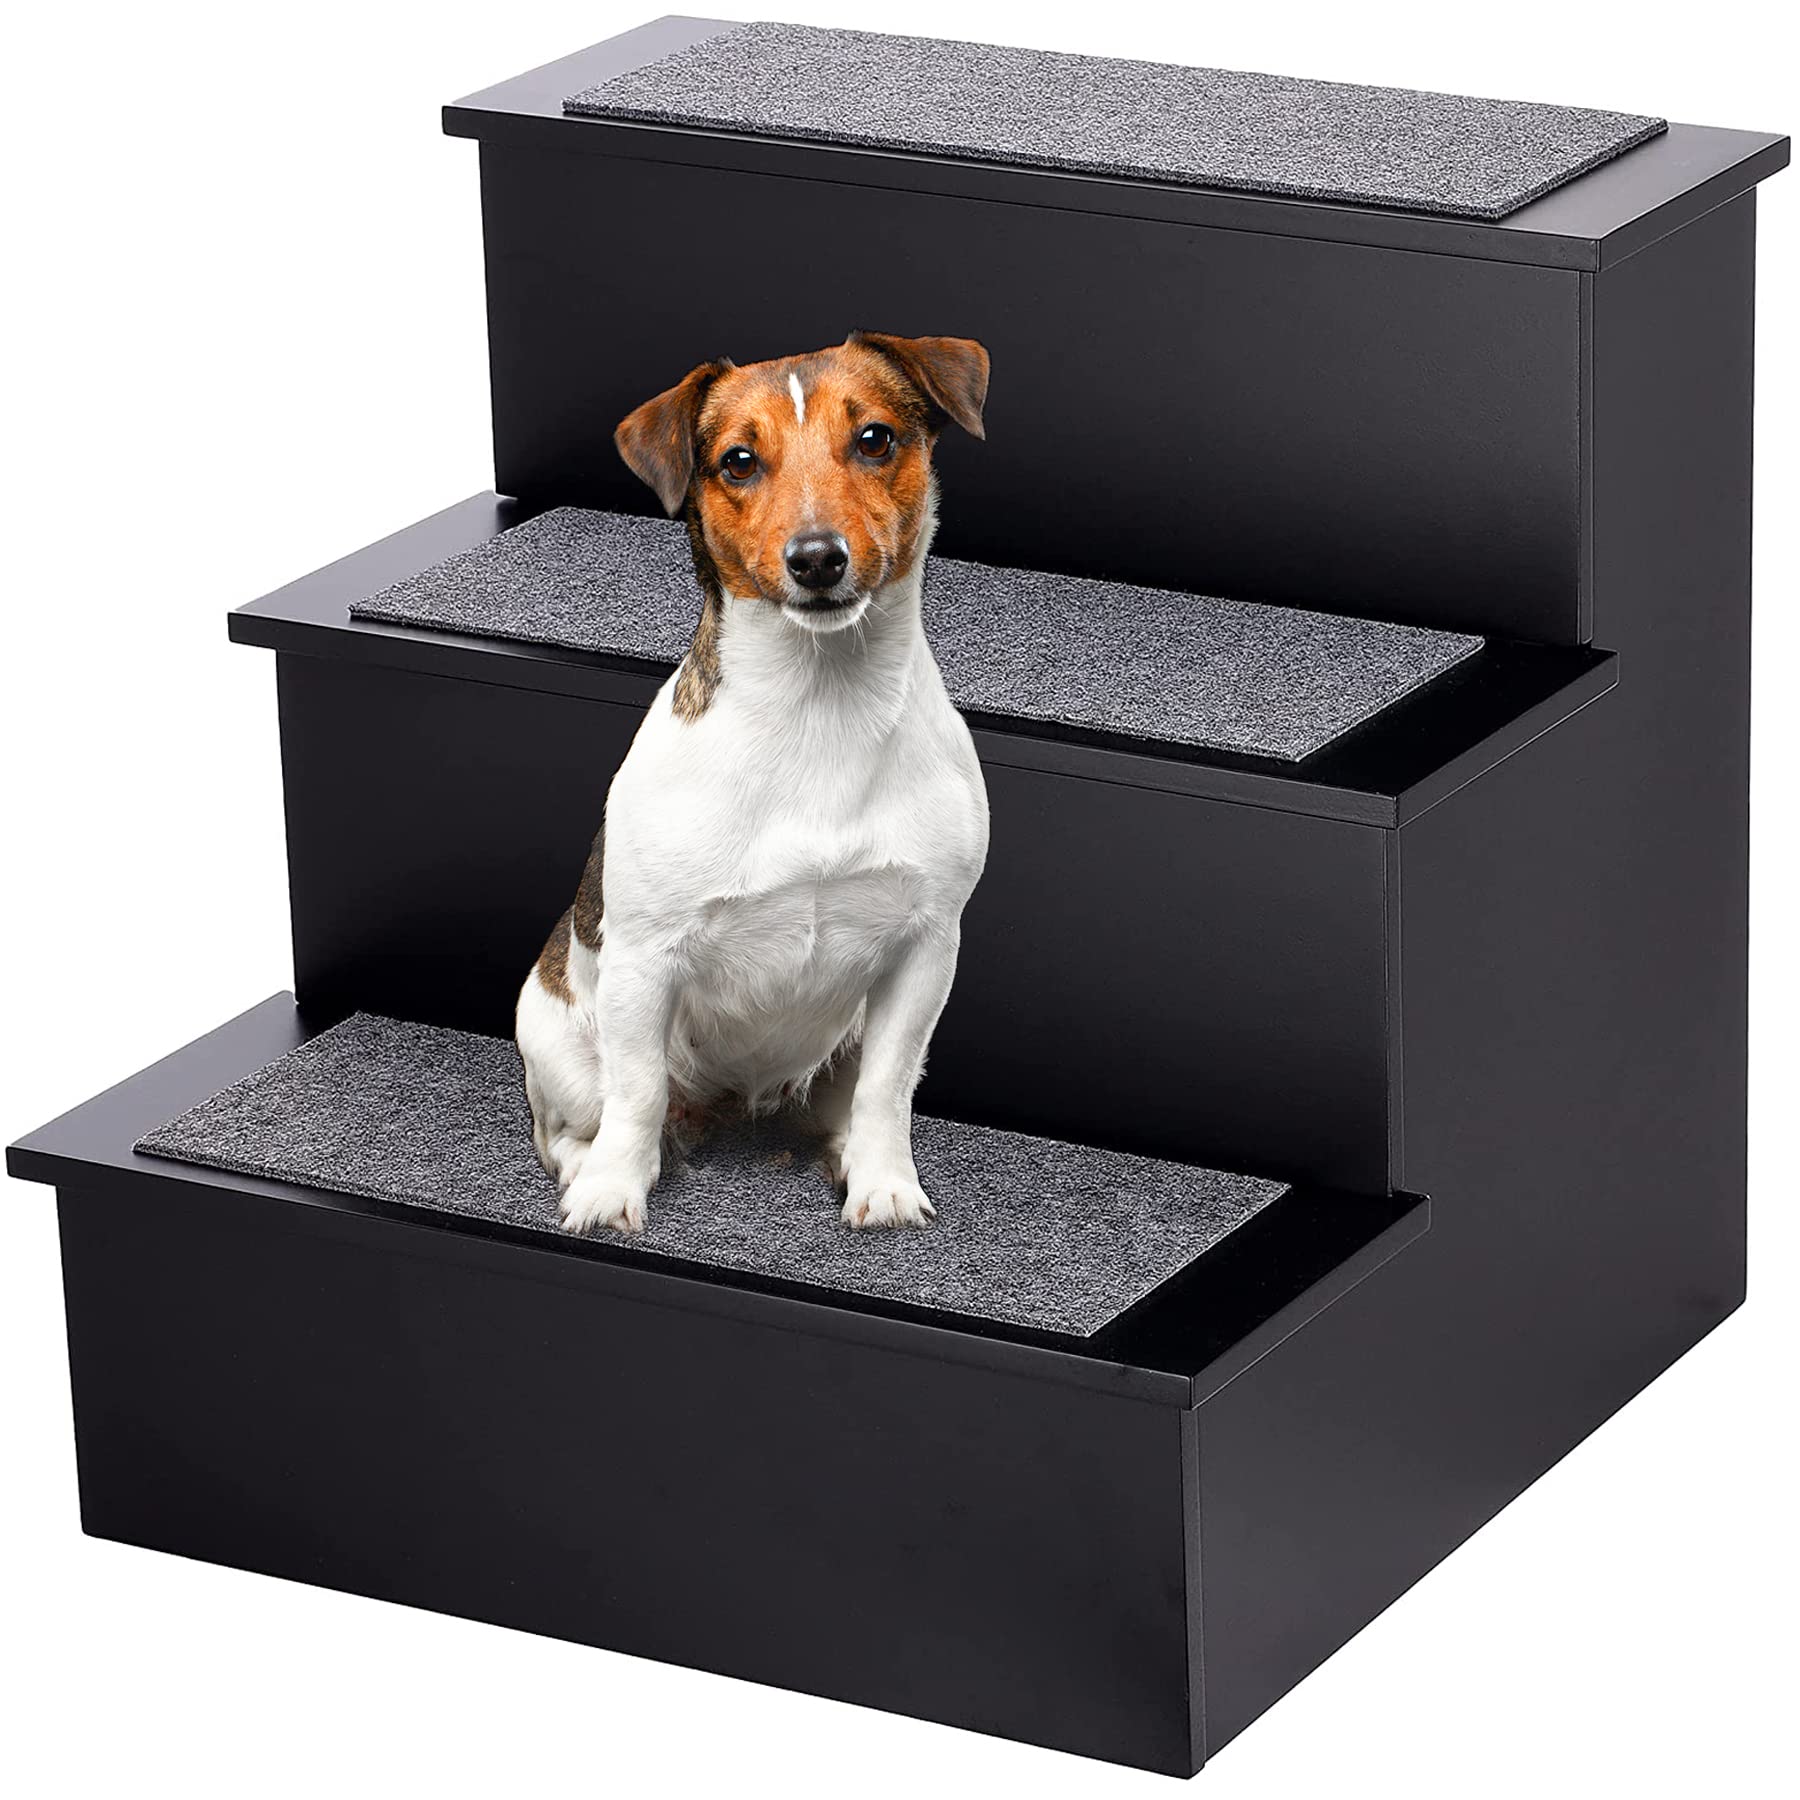 AdirPets Deluxe 3-Step Pet Stairs with Non-Slip Surface and Carpeted Treads - Sleek Pet Steps for Small Dogs, Cats, Elderly or Disabled Pets - Supports Up to 175lbs Weight (Variation)  - Acceptable